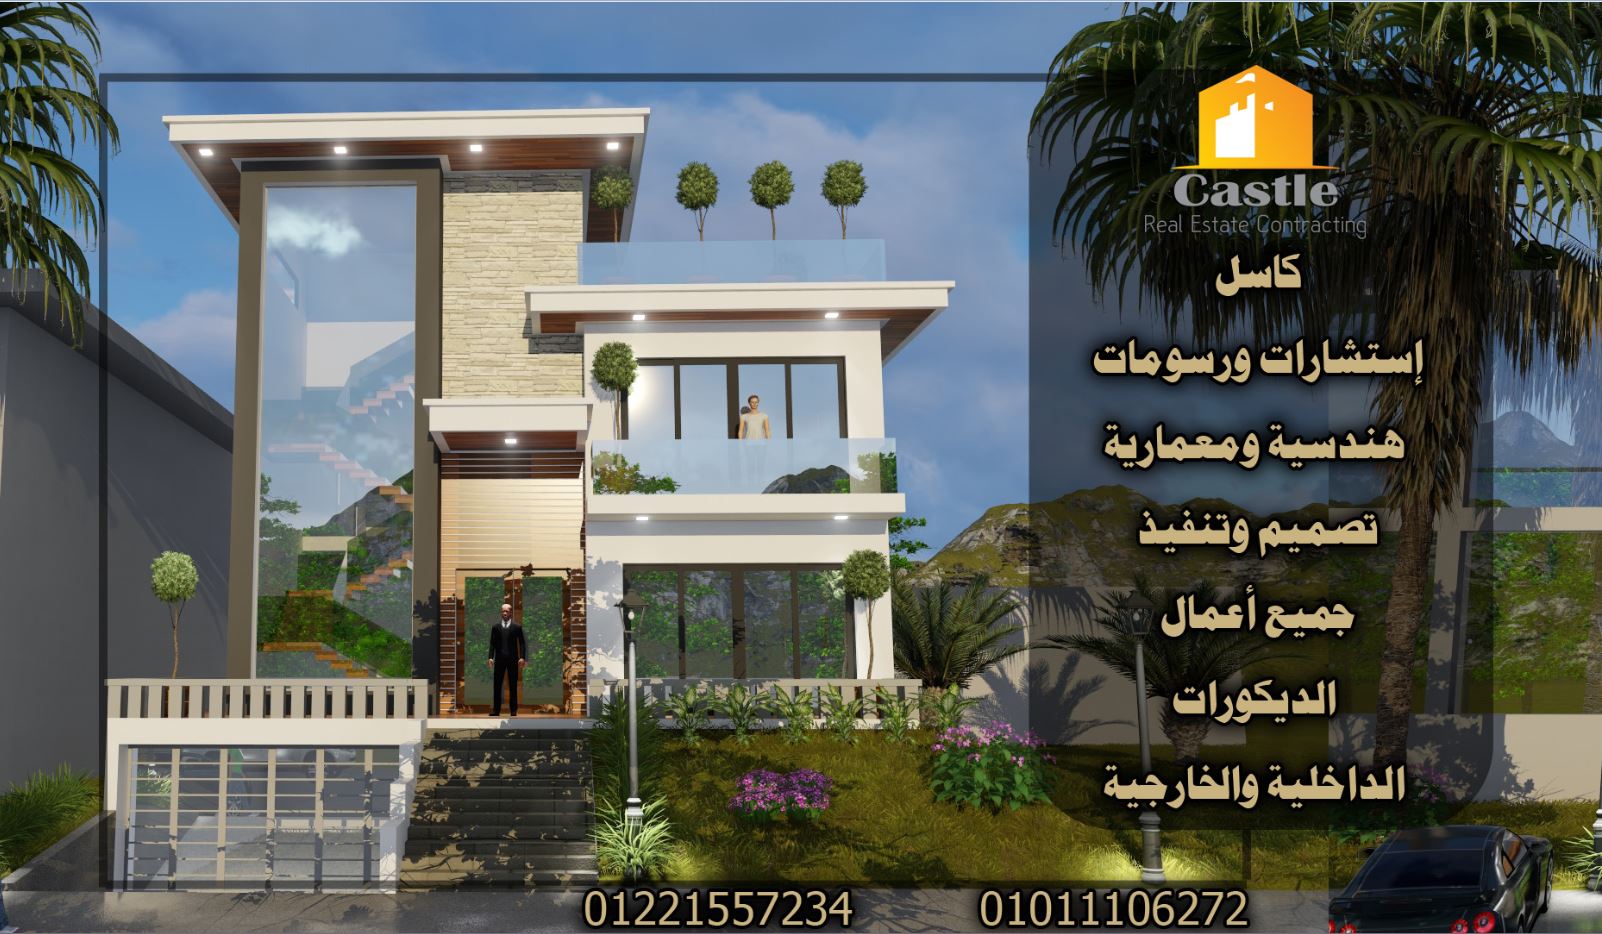 Castle for Architectural Decoration and Finishing